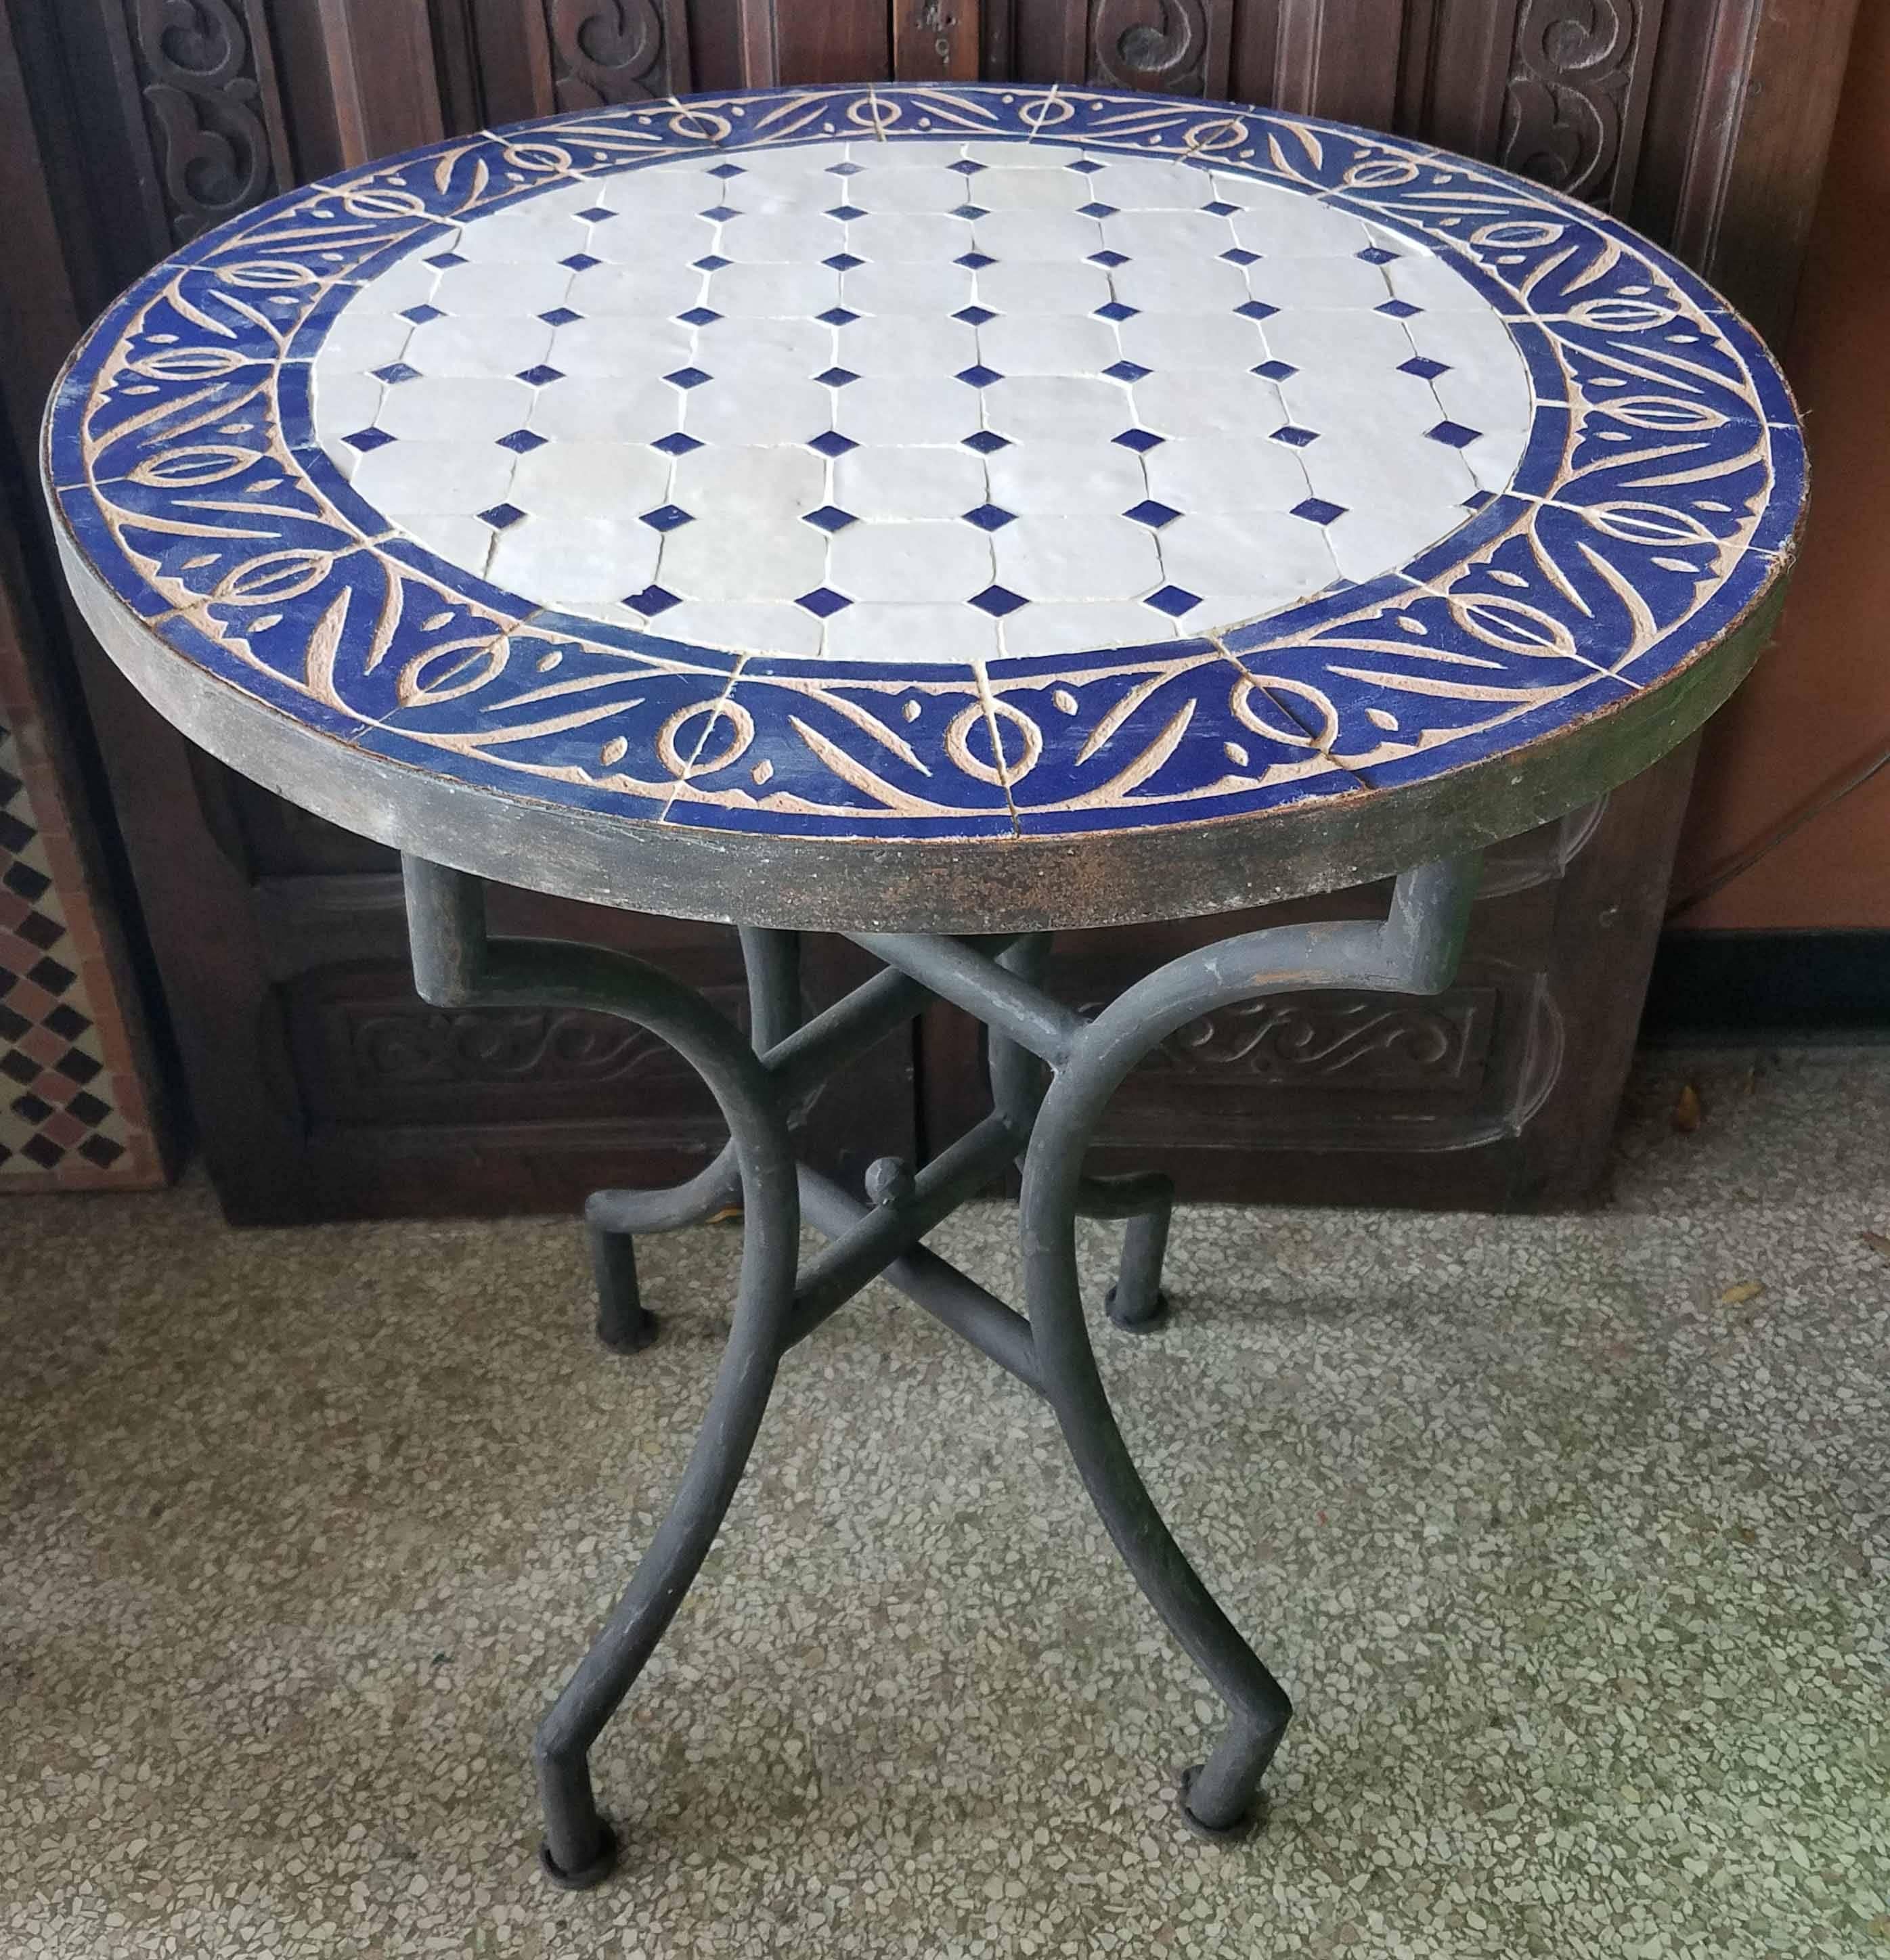 100 % glazed round. White and blue Moroccan mosaic table measuring approximately 24″ in diameter. For both indoors and outdoors. Great as a cocktail table. Vibrant color. Intricate patterns. Included in the price is a wrought iron folding base.